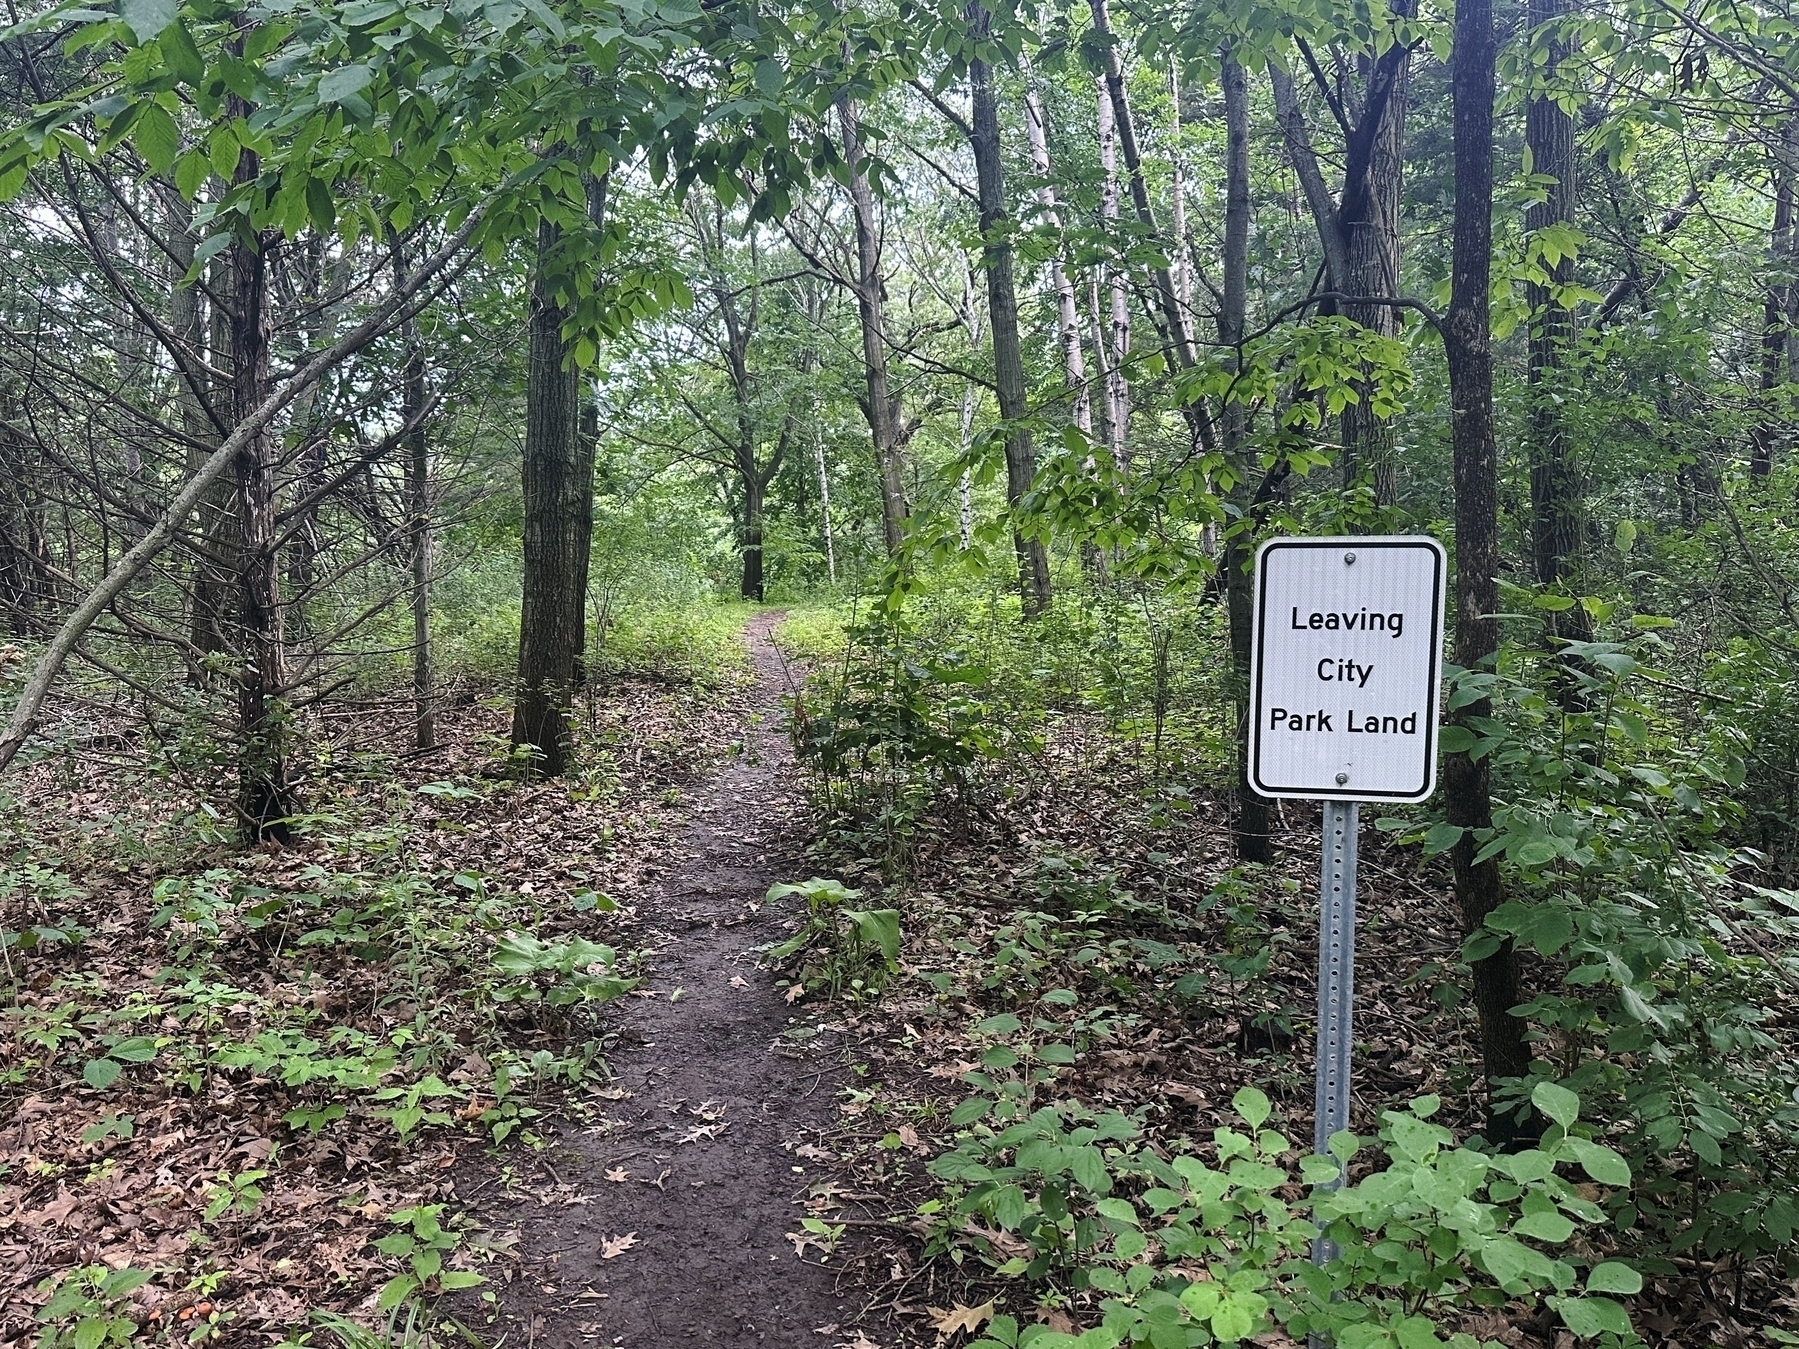 A sign stating Leaving City Park Land stands beside a narrow dirt trail, which winds through a densely wooded area with trees and green undergrowth.